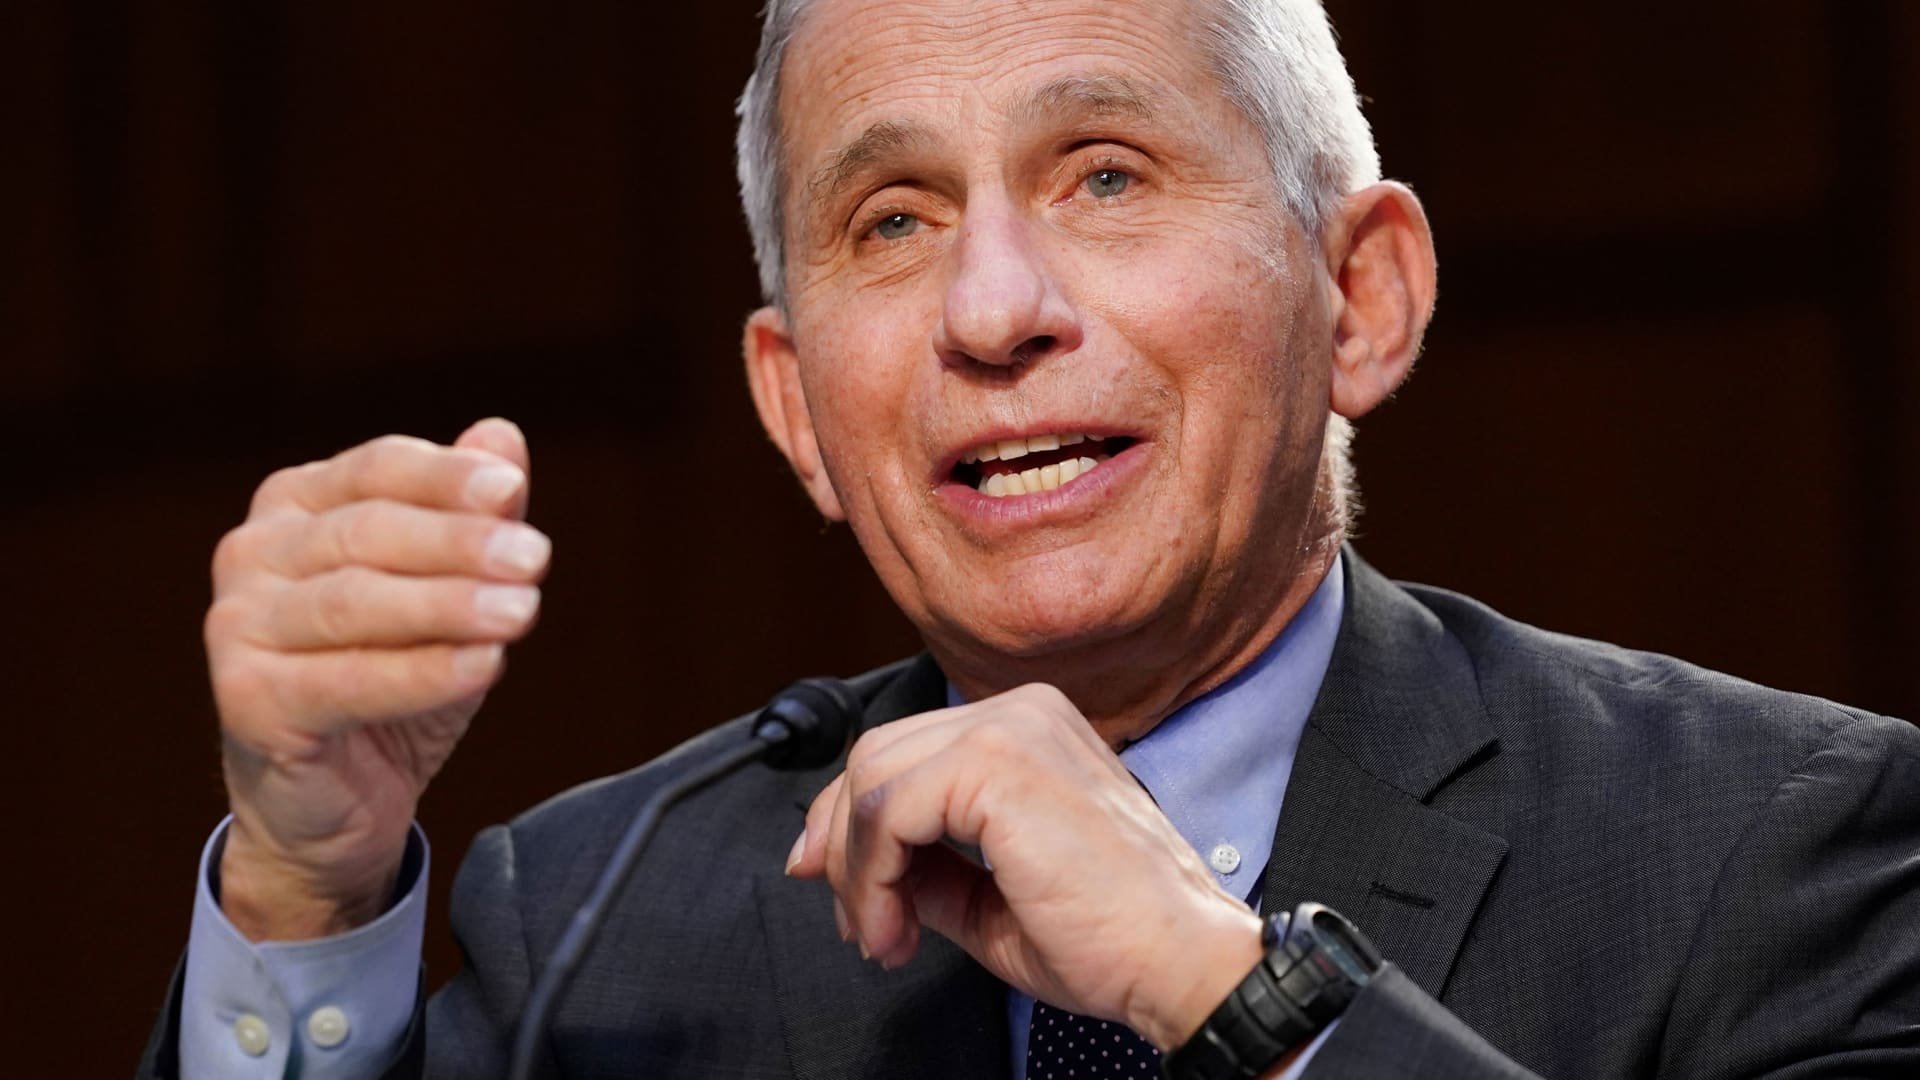 Fauci says U.S. must vaccinate more people before Delta becomes dominant Covid variant in America